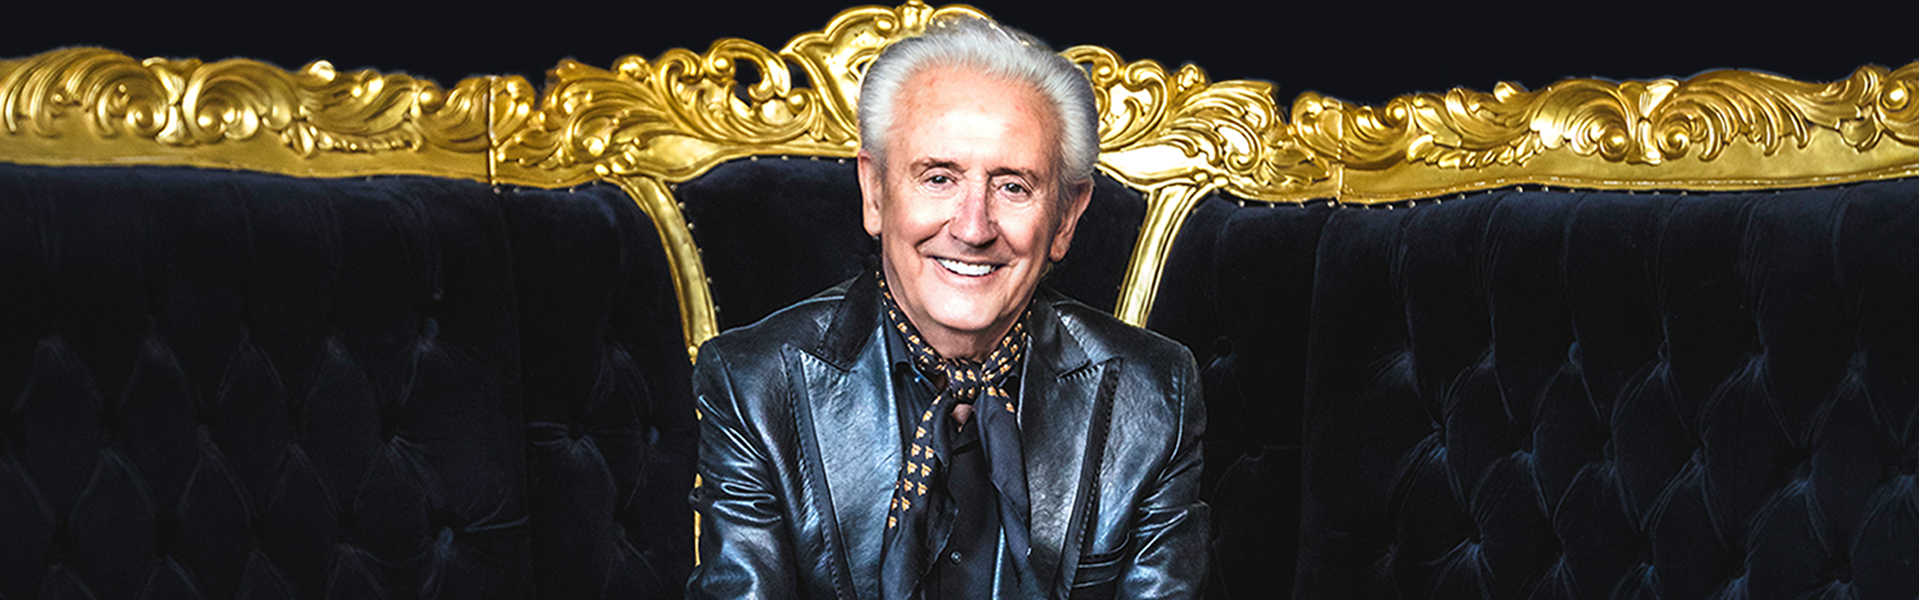 Tony Christie - A Life of Music: Celebrating 80 Years